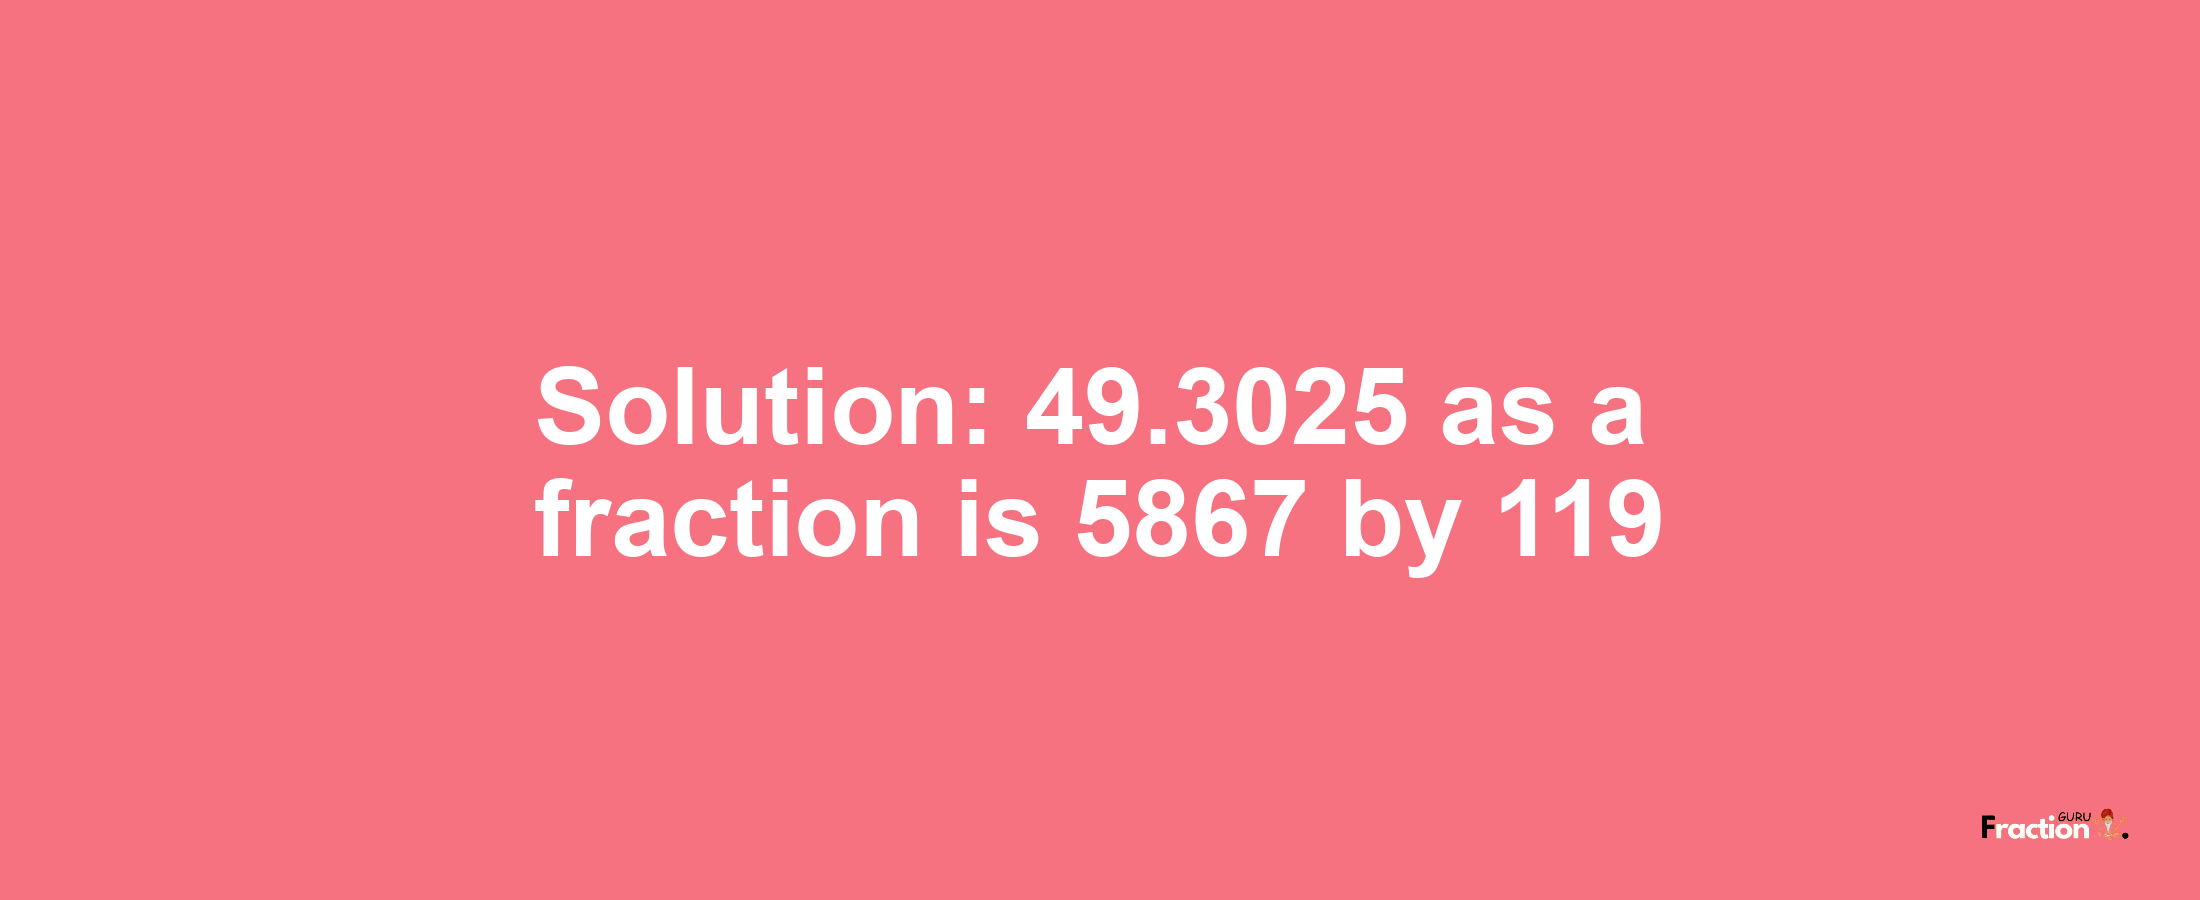 Solution:49.3025 as a fraction is 5867/119